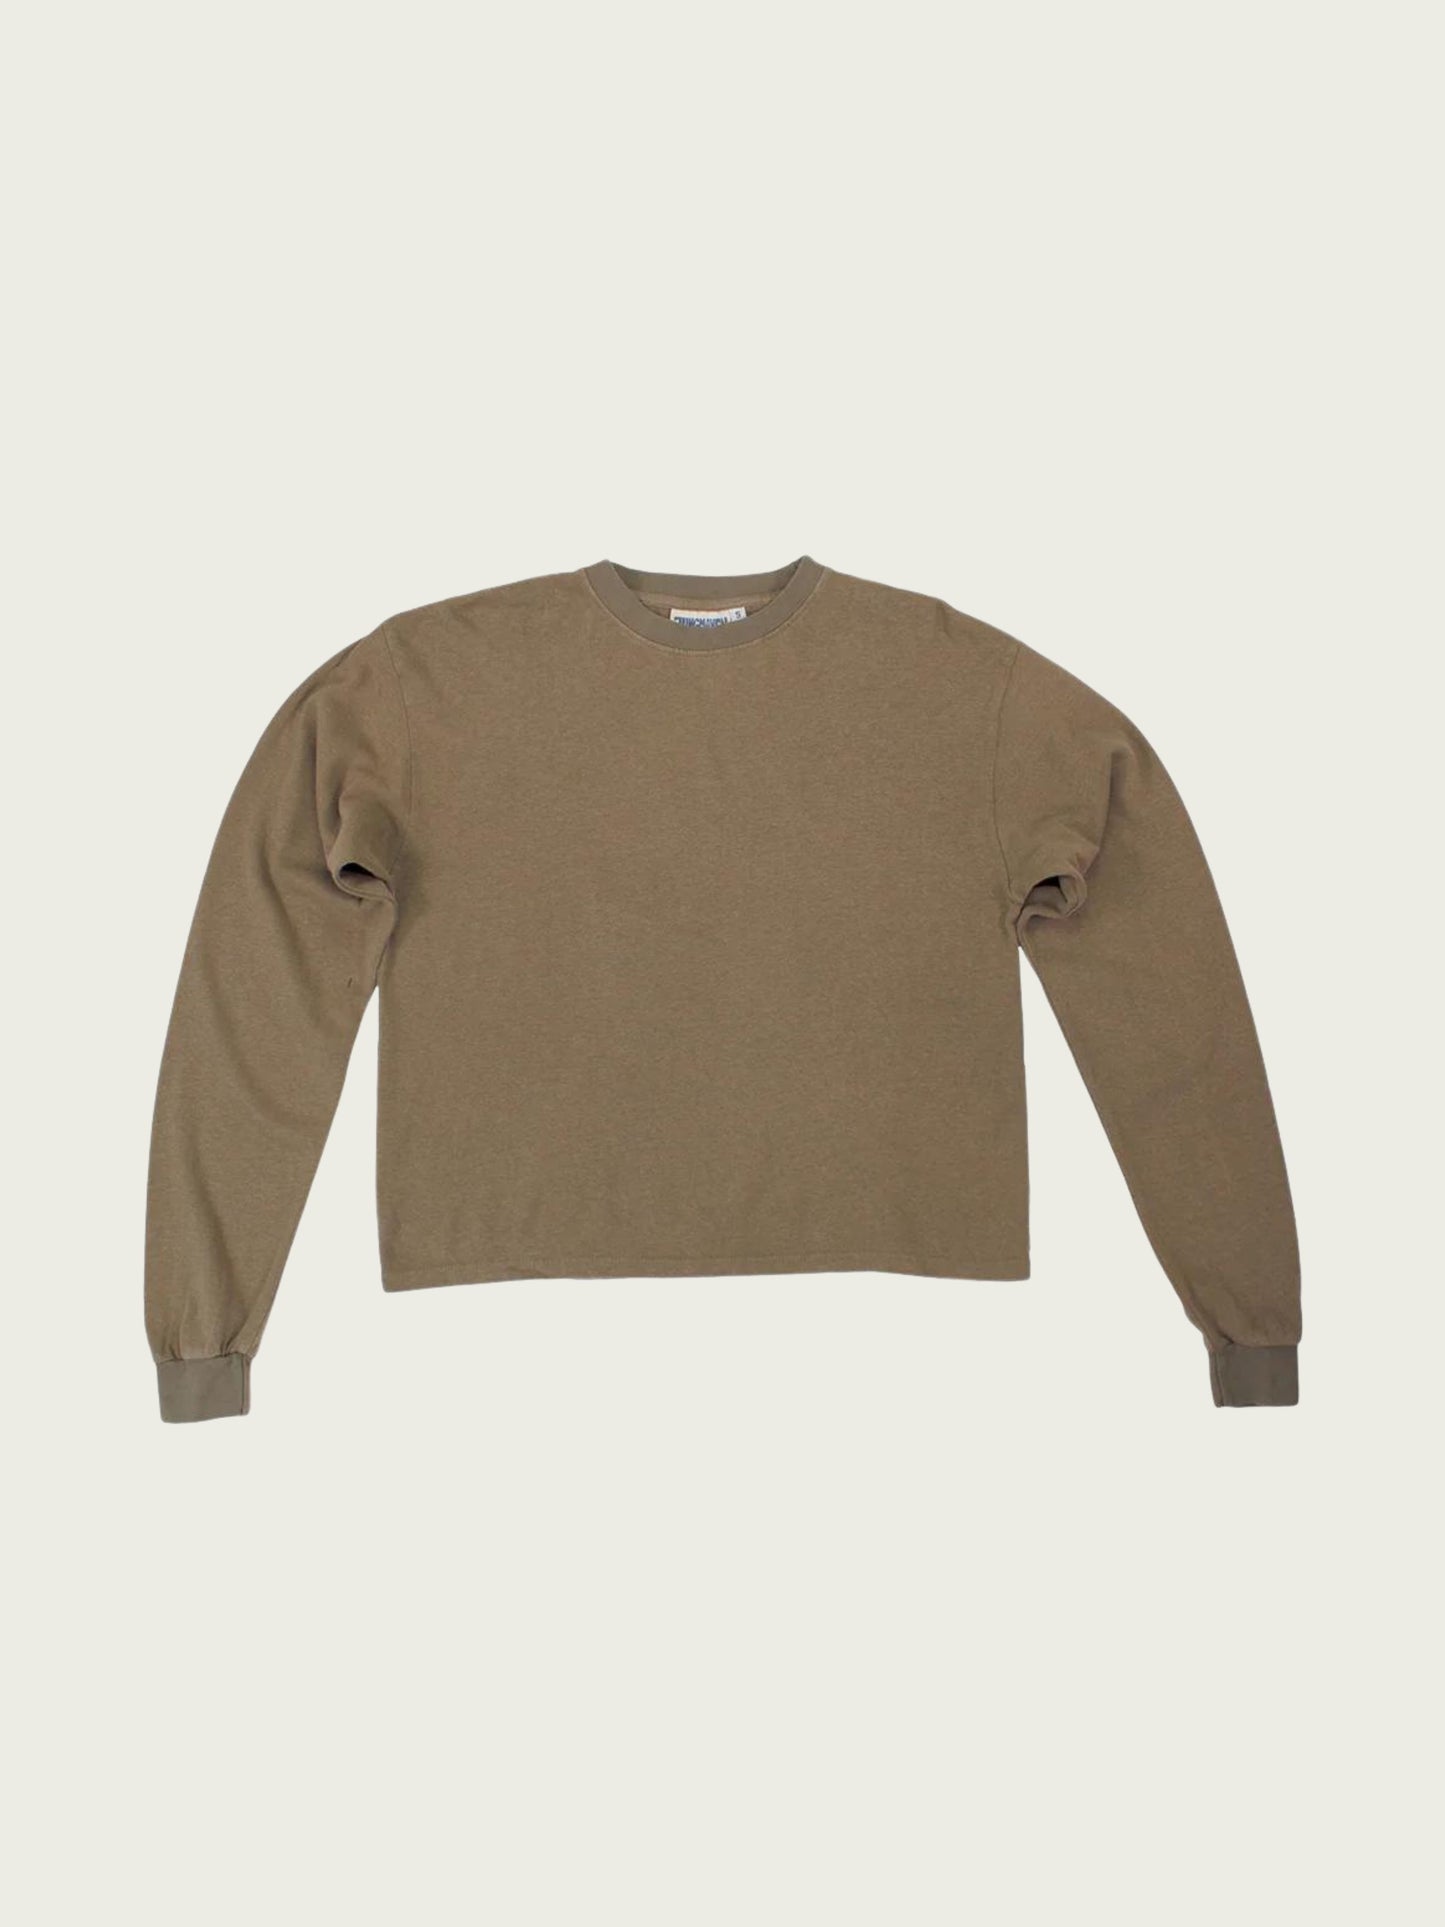 Jungmaven Cropped Long Sleeve Tee - Coyote